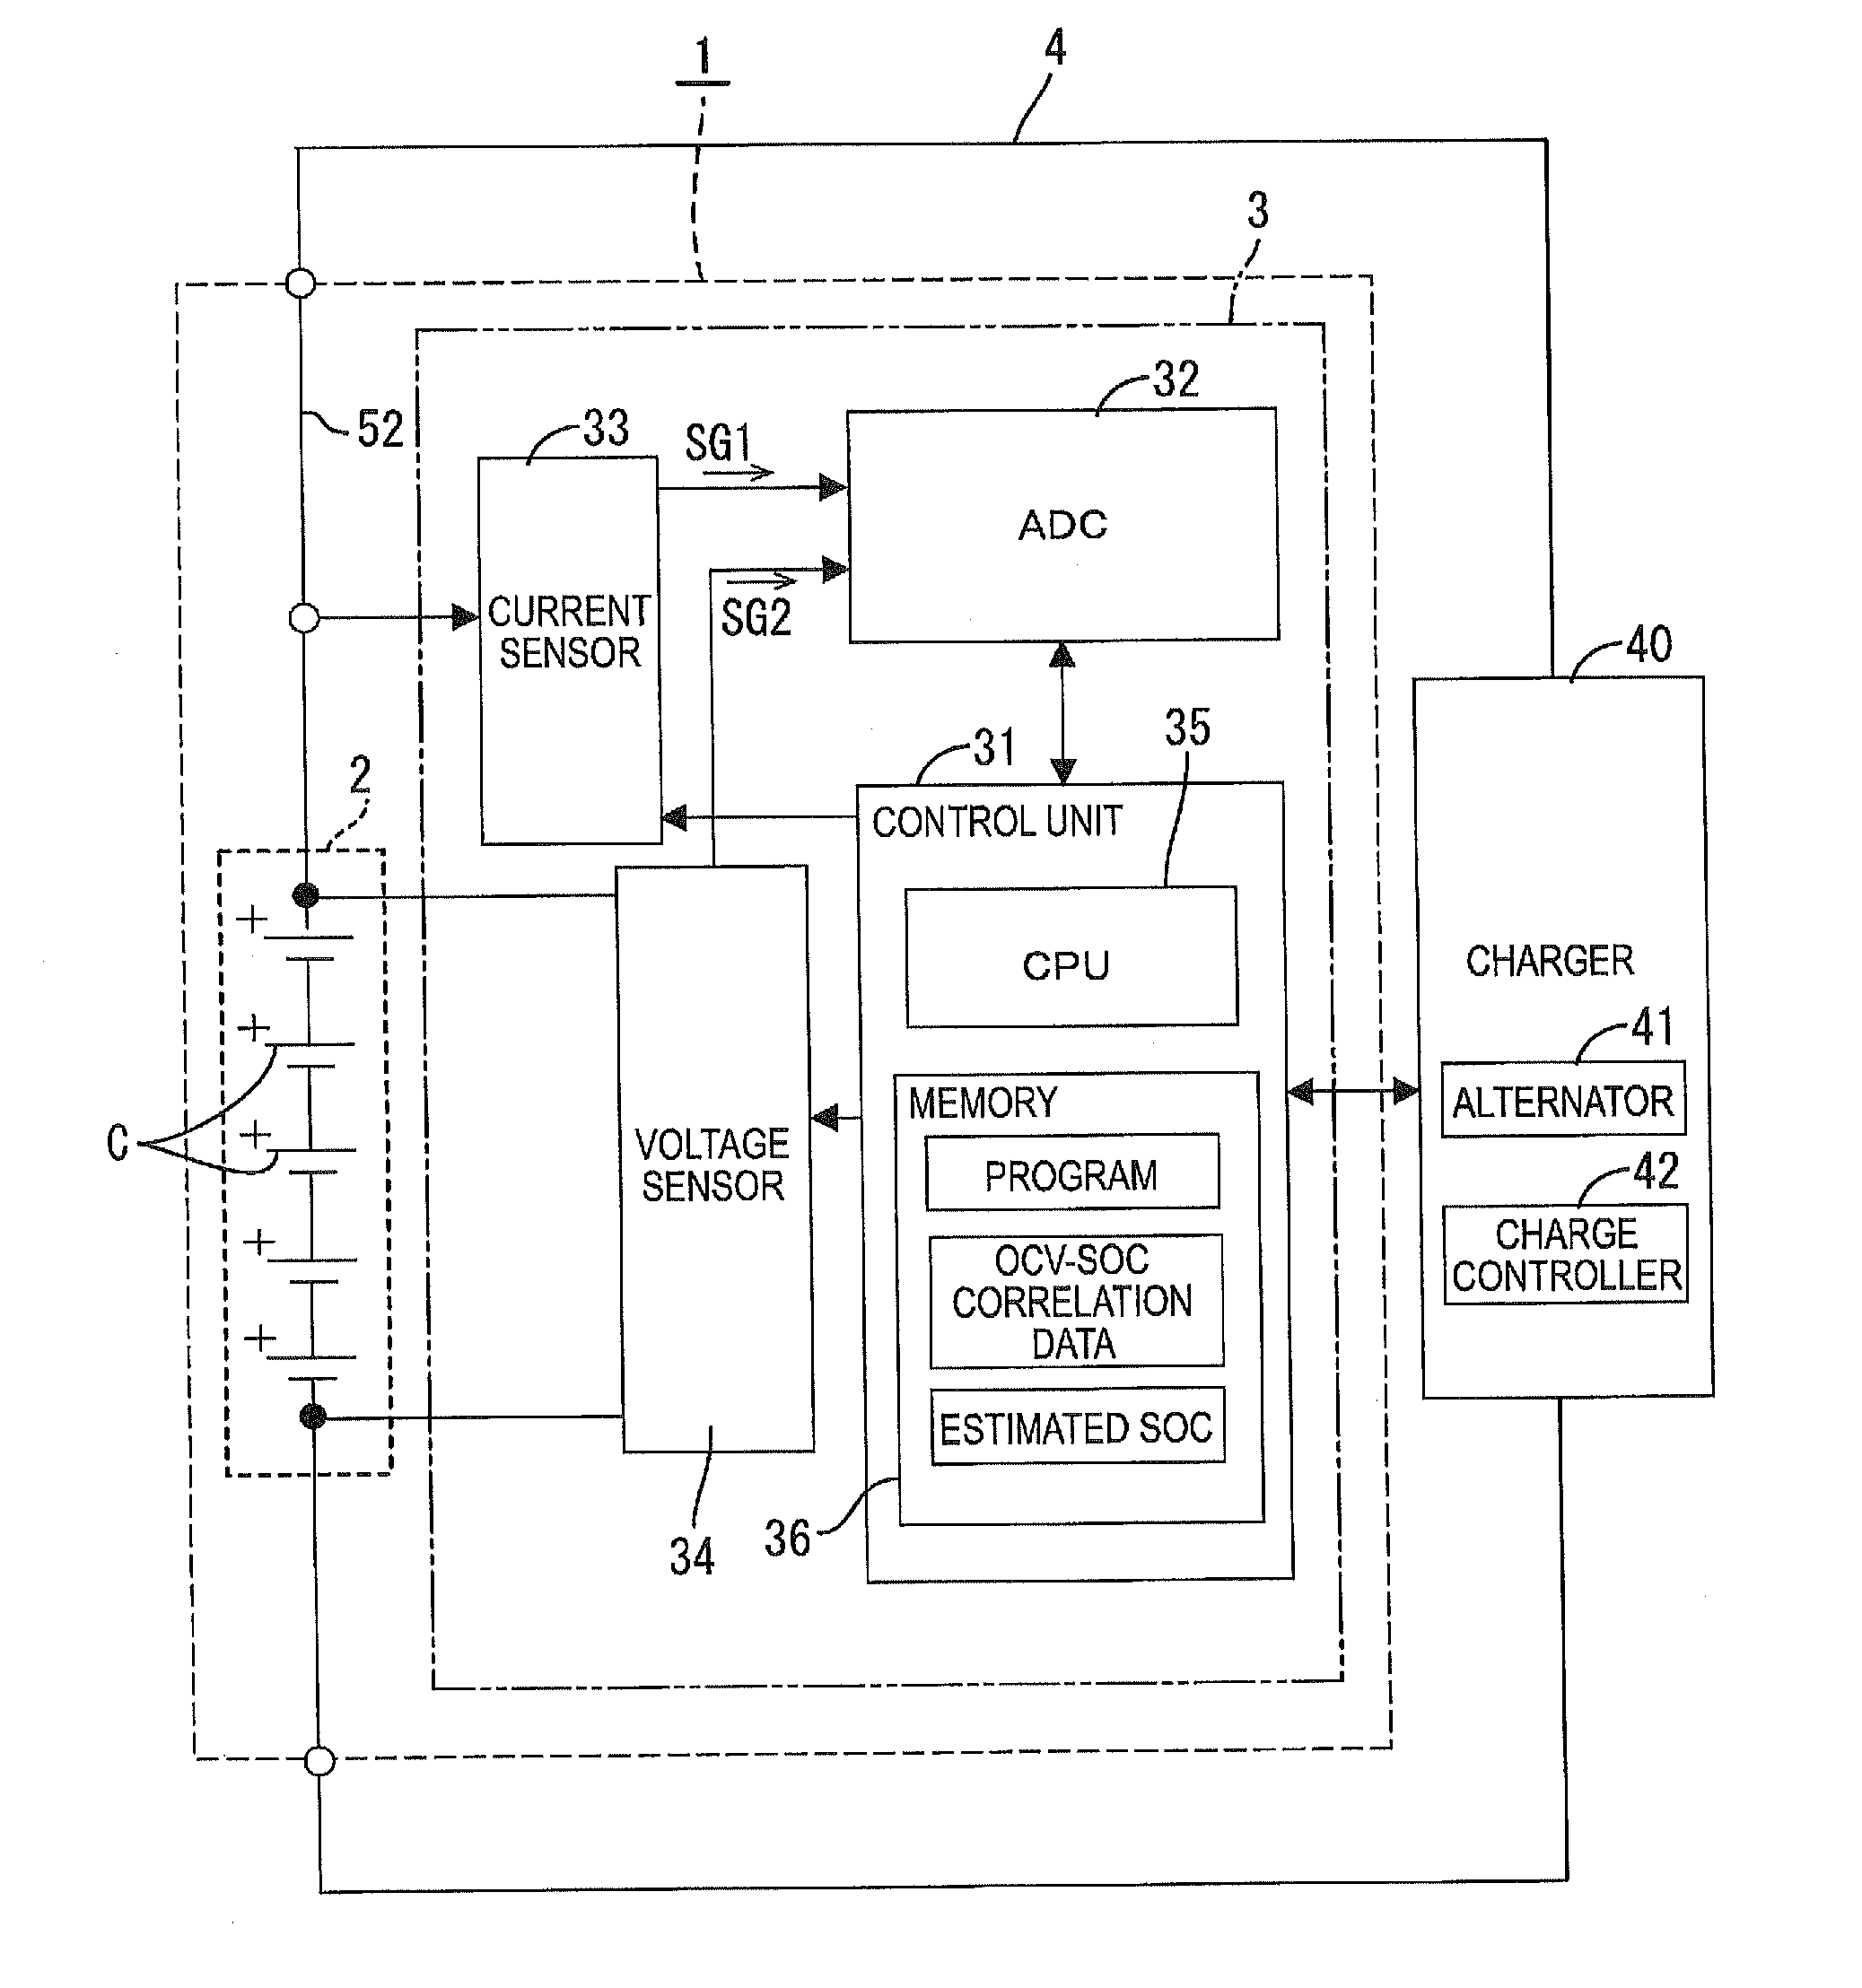 Electric storage device management system, electric storage device pack, and method of estimating state of charge